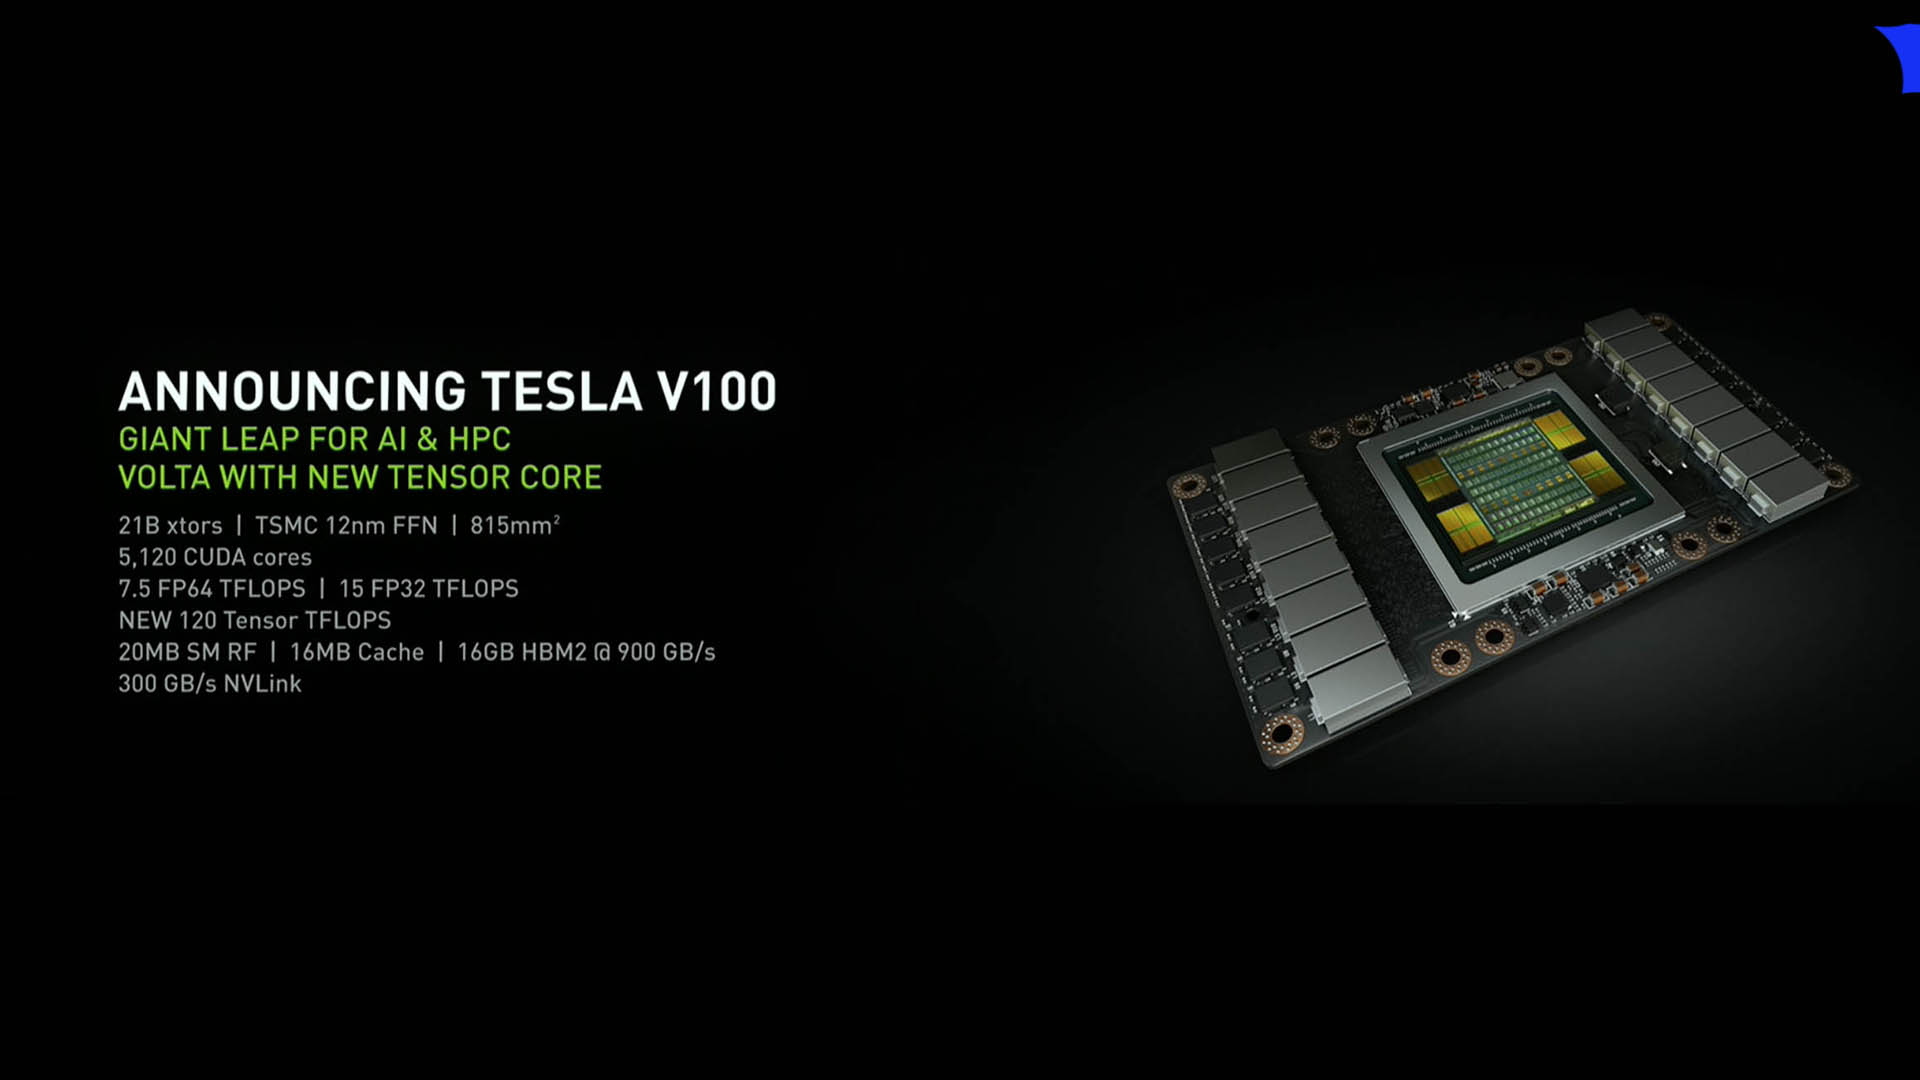 Nvidia Volta GV100 Unveiled at GTC 2017; Includes 5120 CUDA Cores, 16 GB HBM2, and 12nm FinFET Process